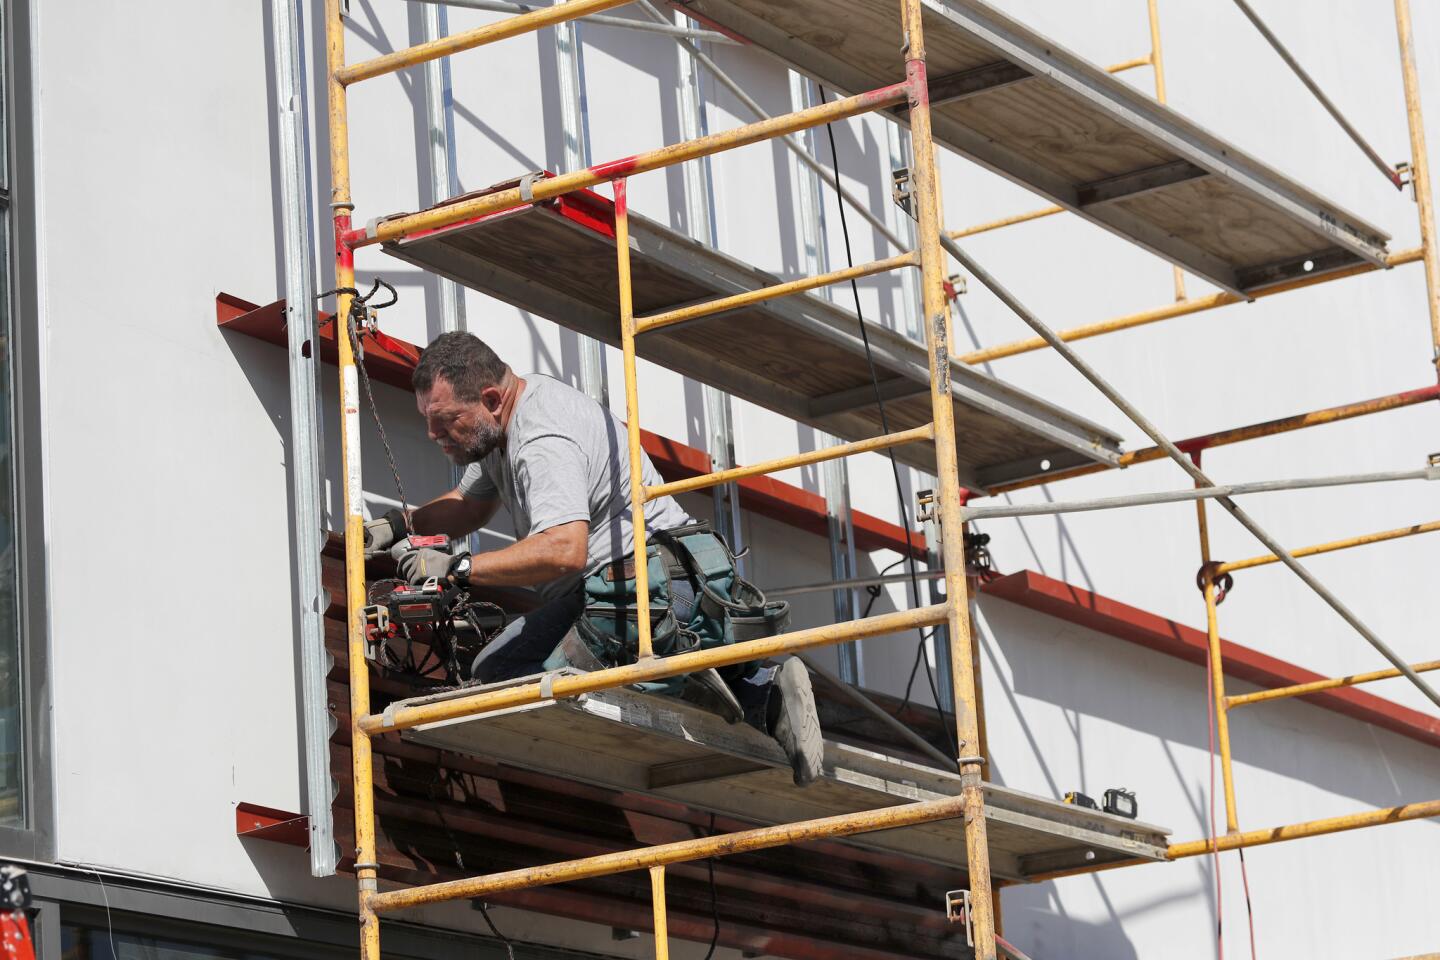 Marcos Ramirez "ERRE" works on his installation on the exterior of the Oceanside Museum of Art.